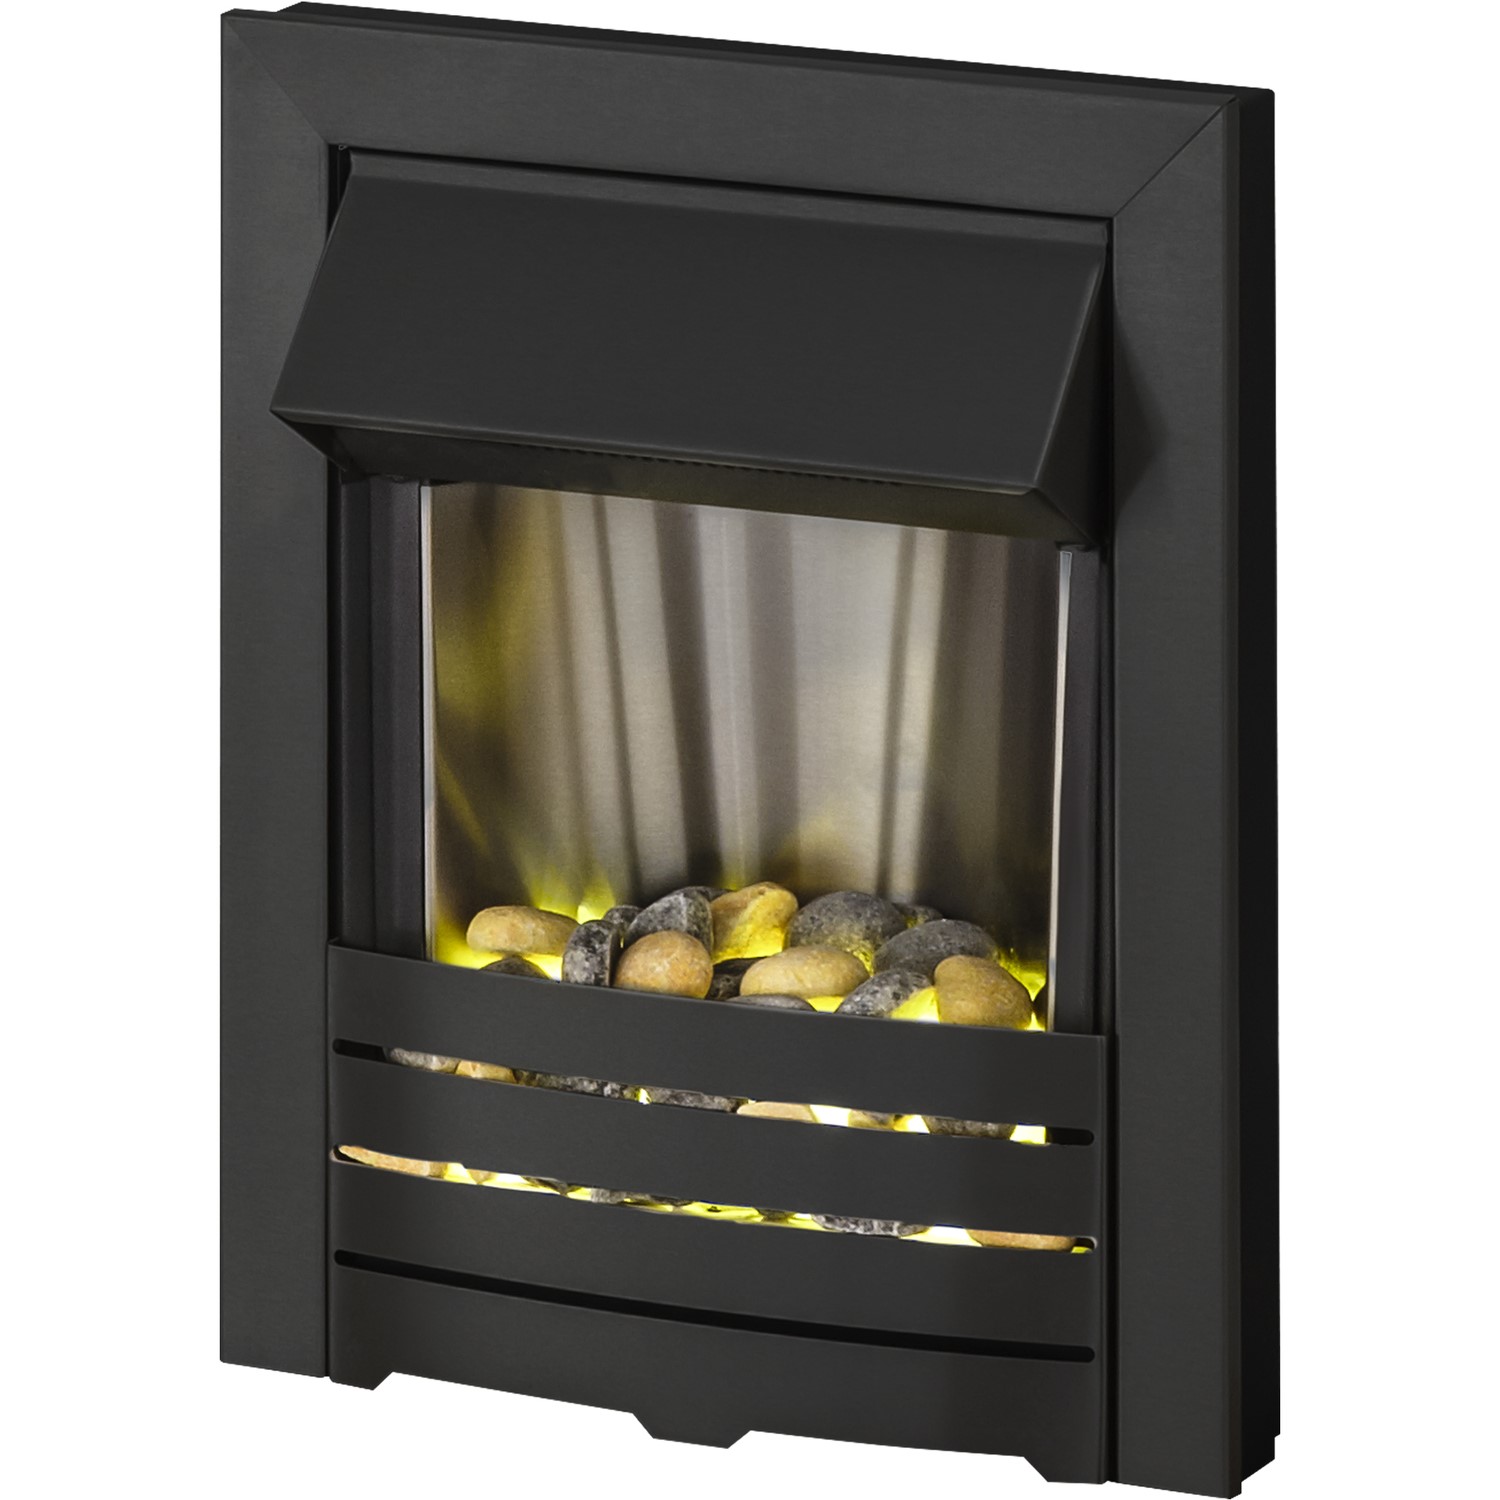 Read more about Adam black inset electric fireplace helios